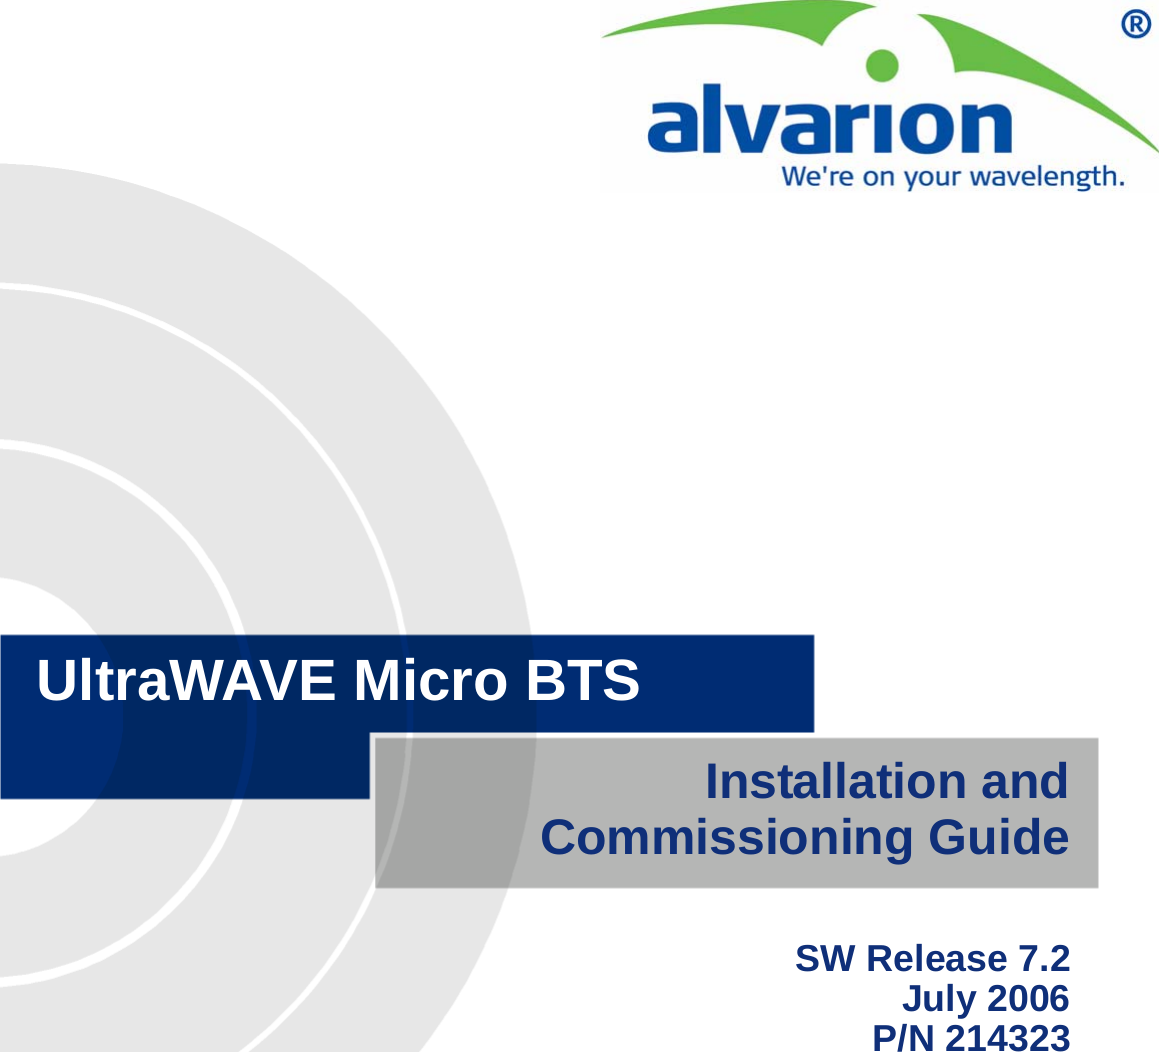 Installation and Commissioning GuideSW Release 7.2July 2006P/N 214323UltraWAVE Micro BTS